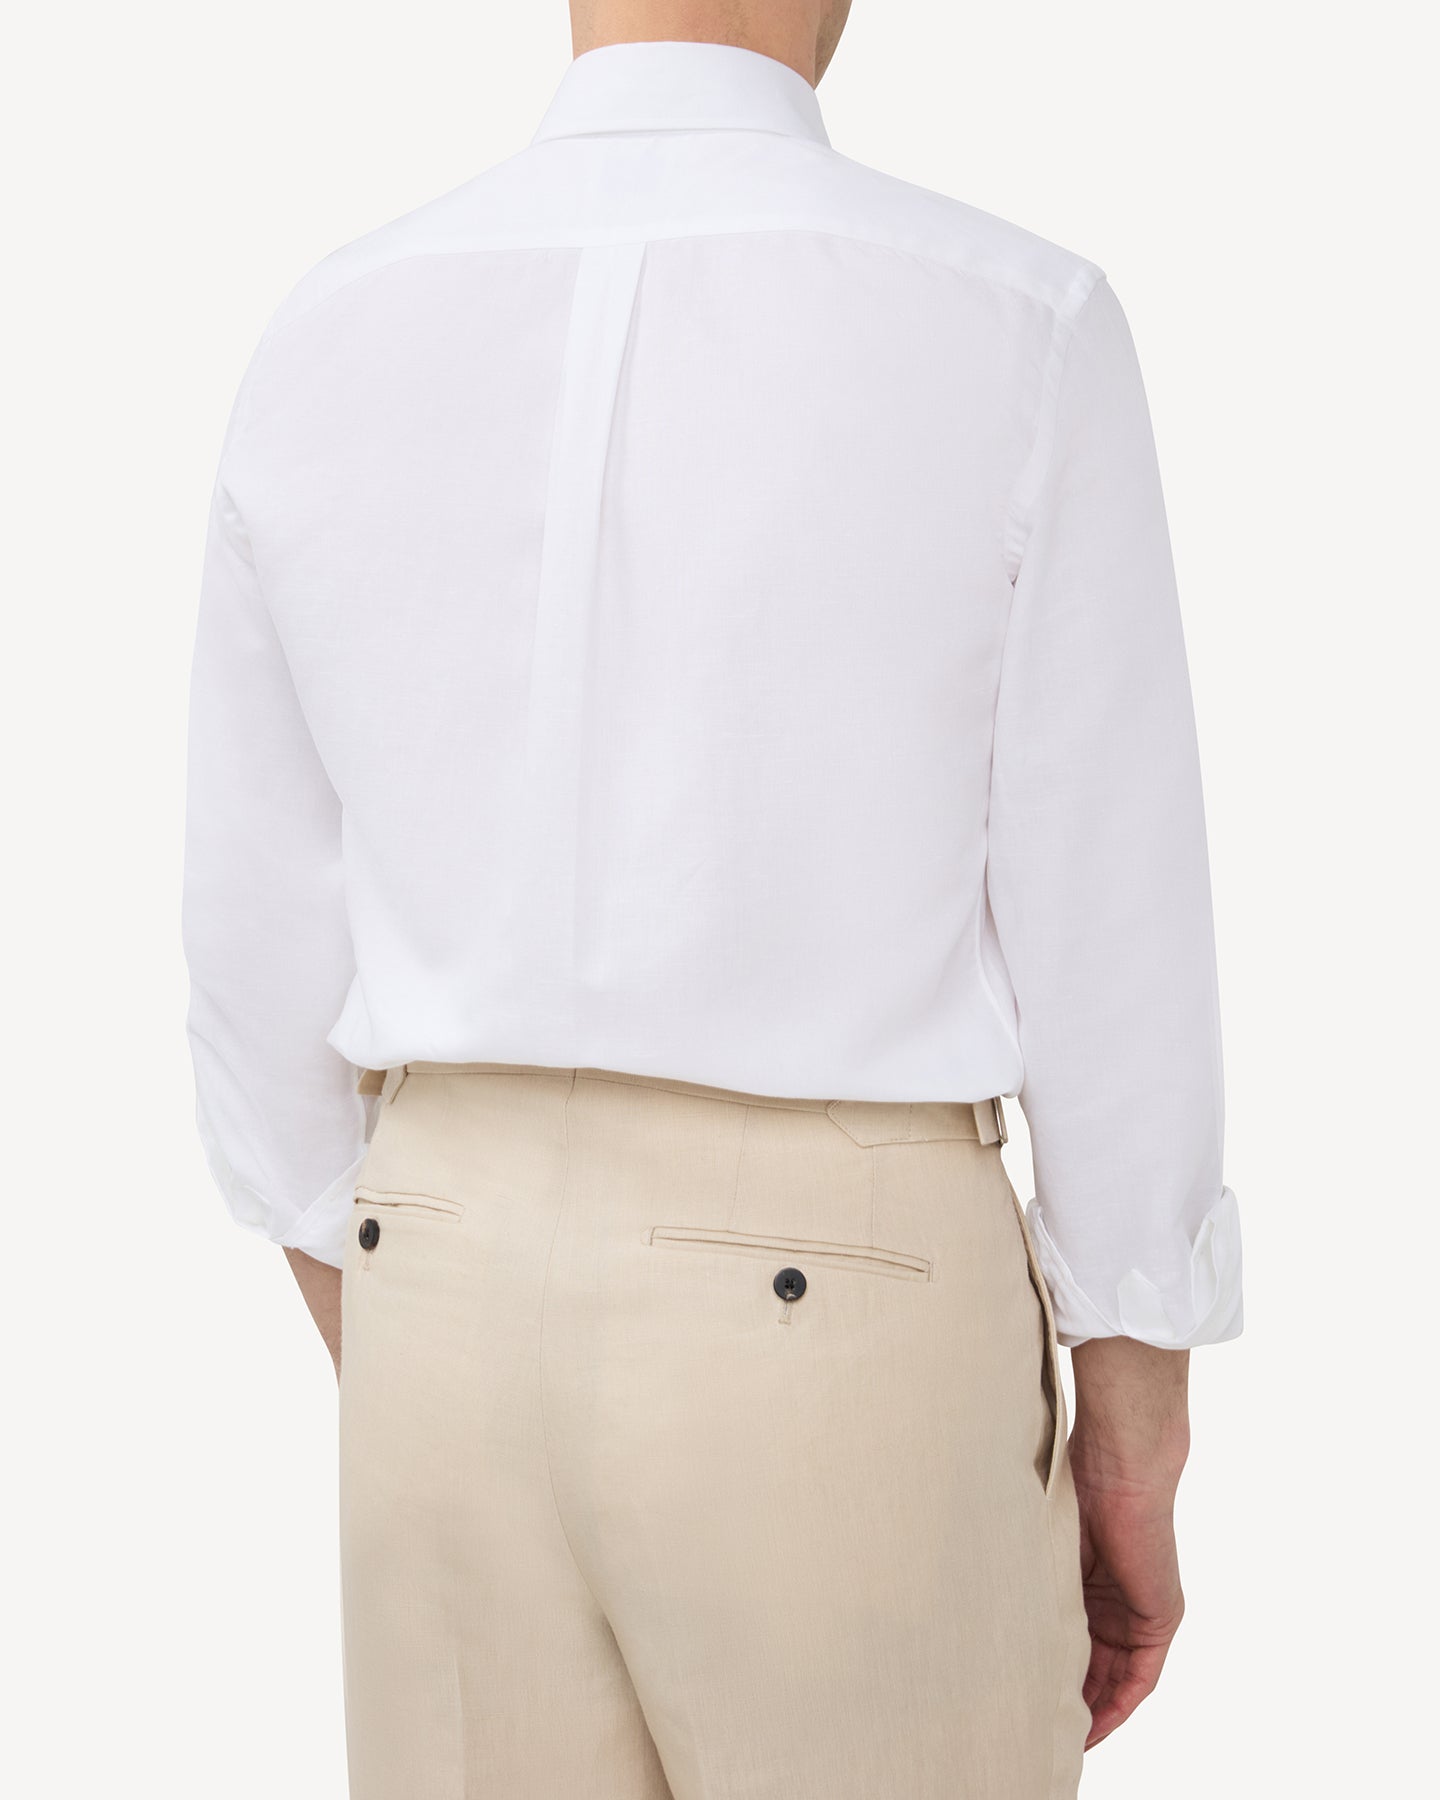 Man wearing a white summer OCBD shirt with stone linen trousers